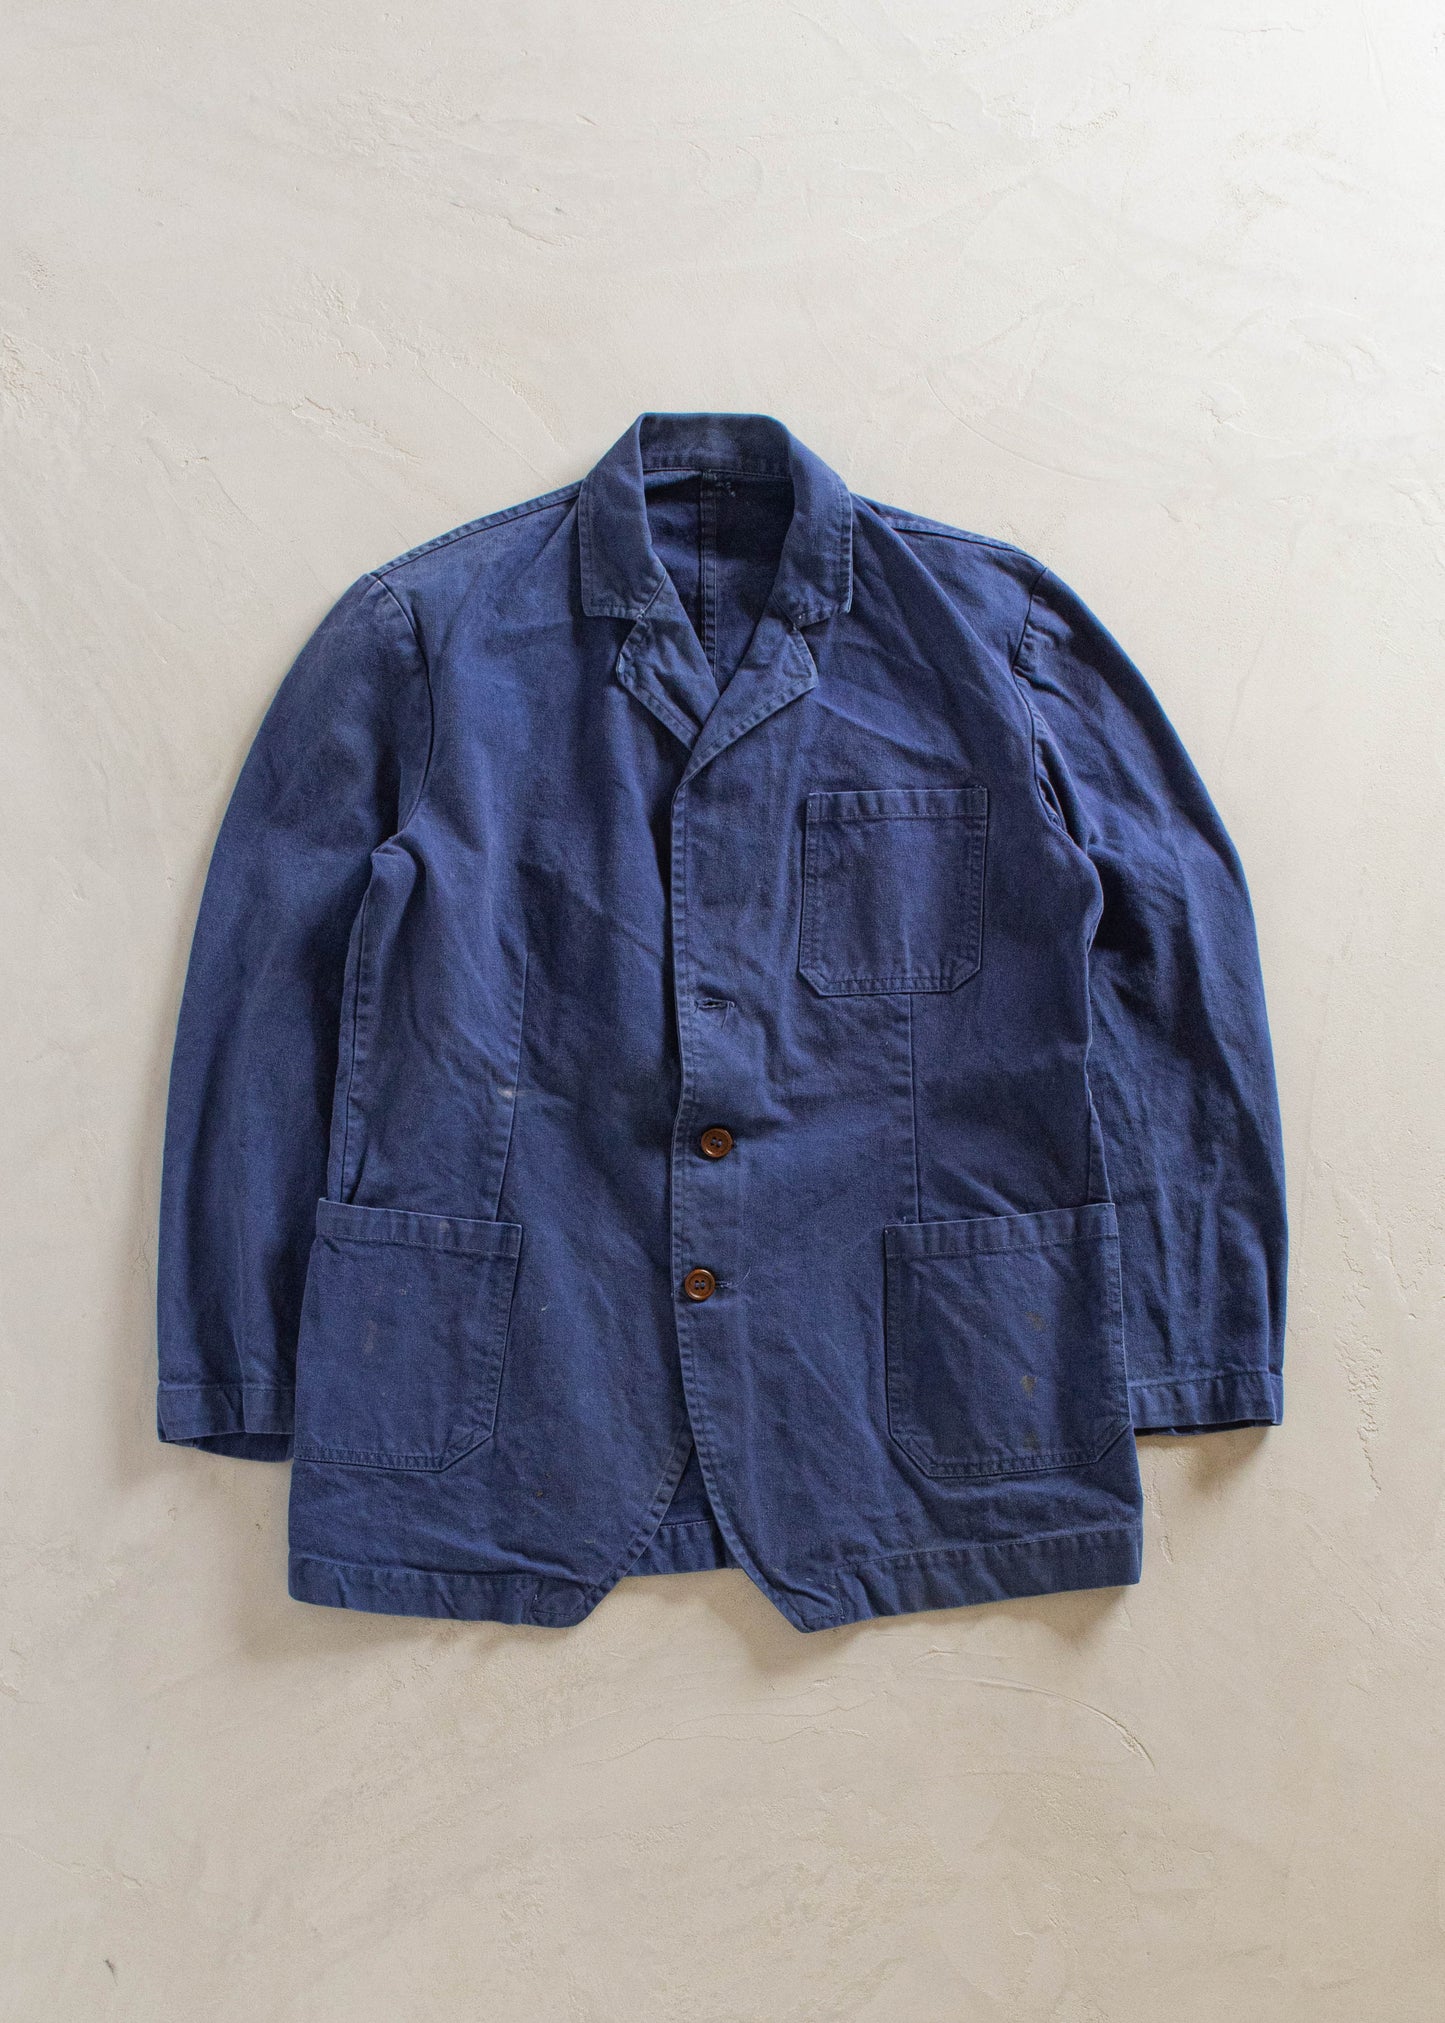 1980s French Workwear Button Up Chore Jacket Size S/M